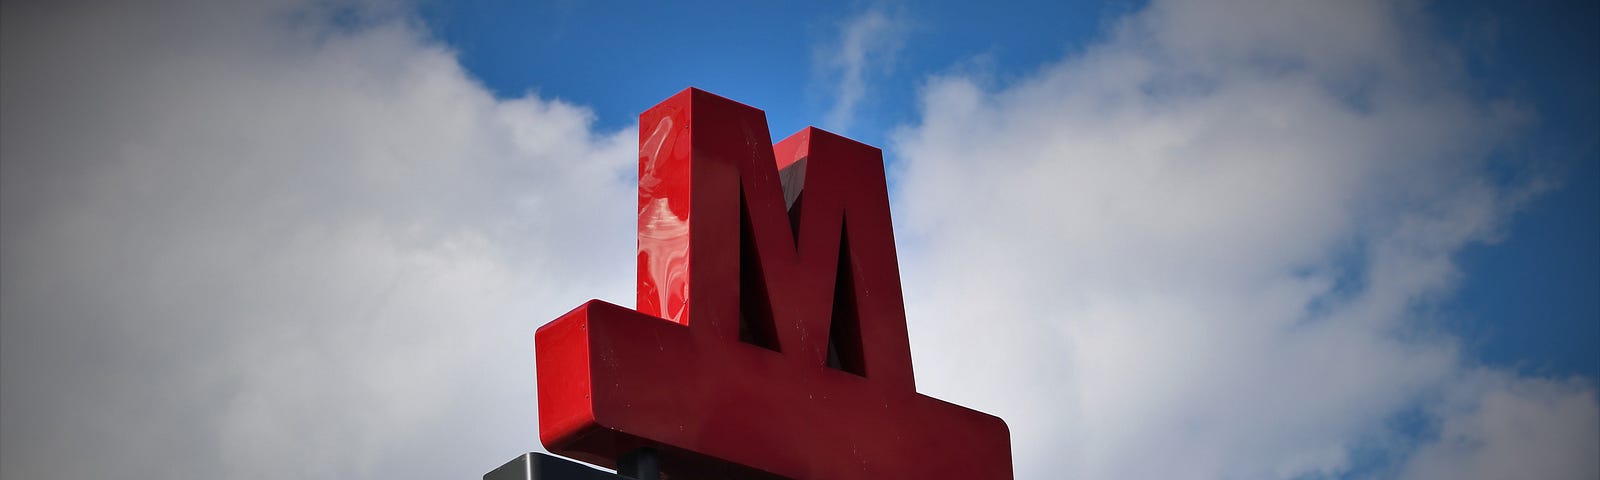 Large red M Copenhagen metro logo on a cloudy background with patches of blue